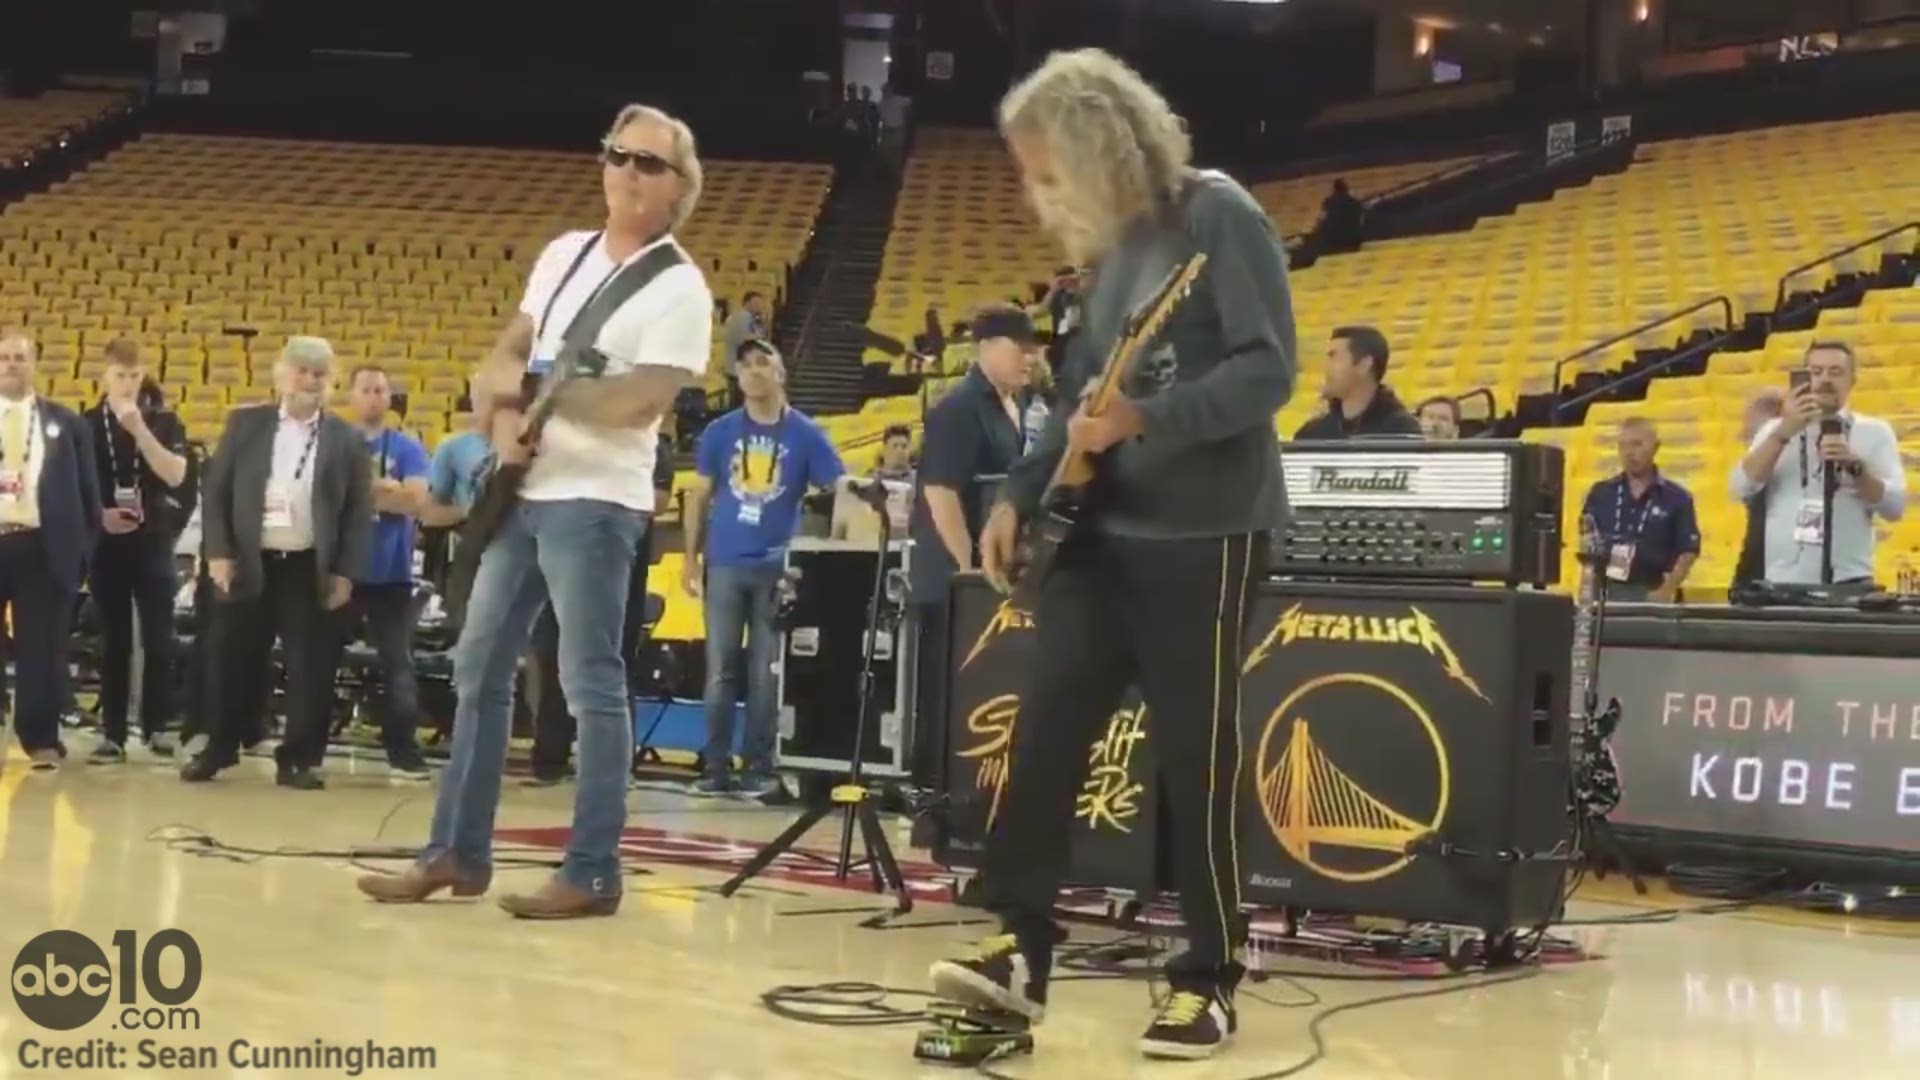 ABC10 Sports Reporter Sean Cunningham captured this video of Metallica rehearsing the national anthem during soundcheck for the NBA Finals in Oakland between the Golden State Warriors and The Toronto Raptors.